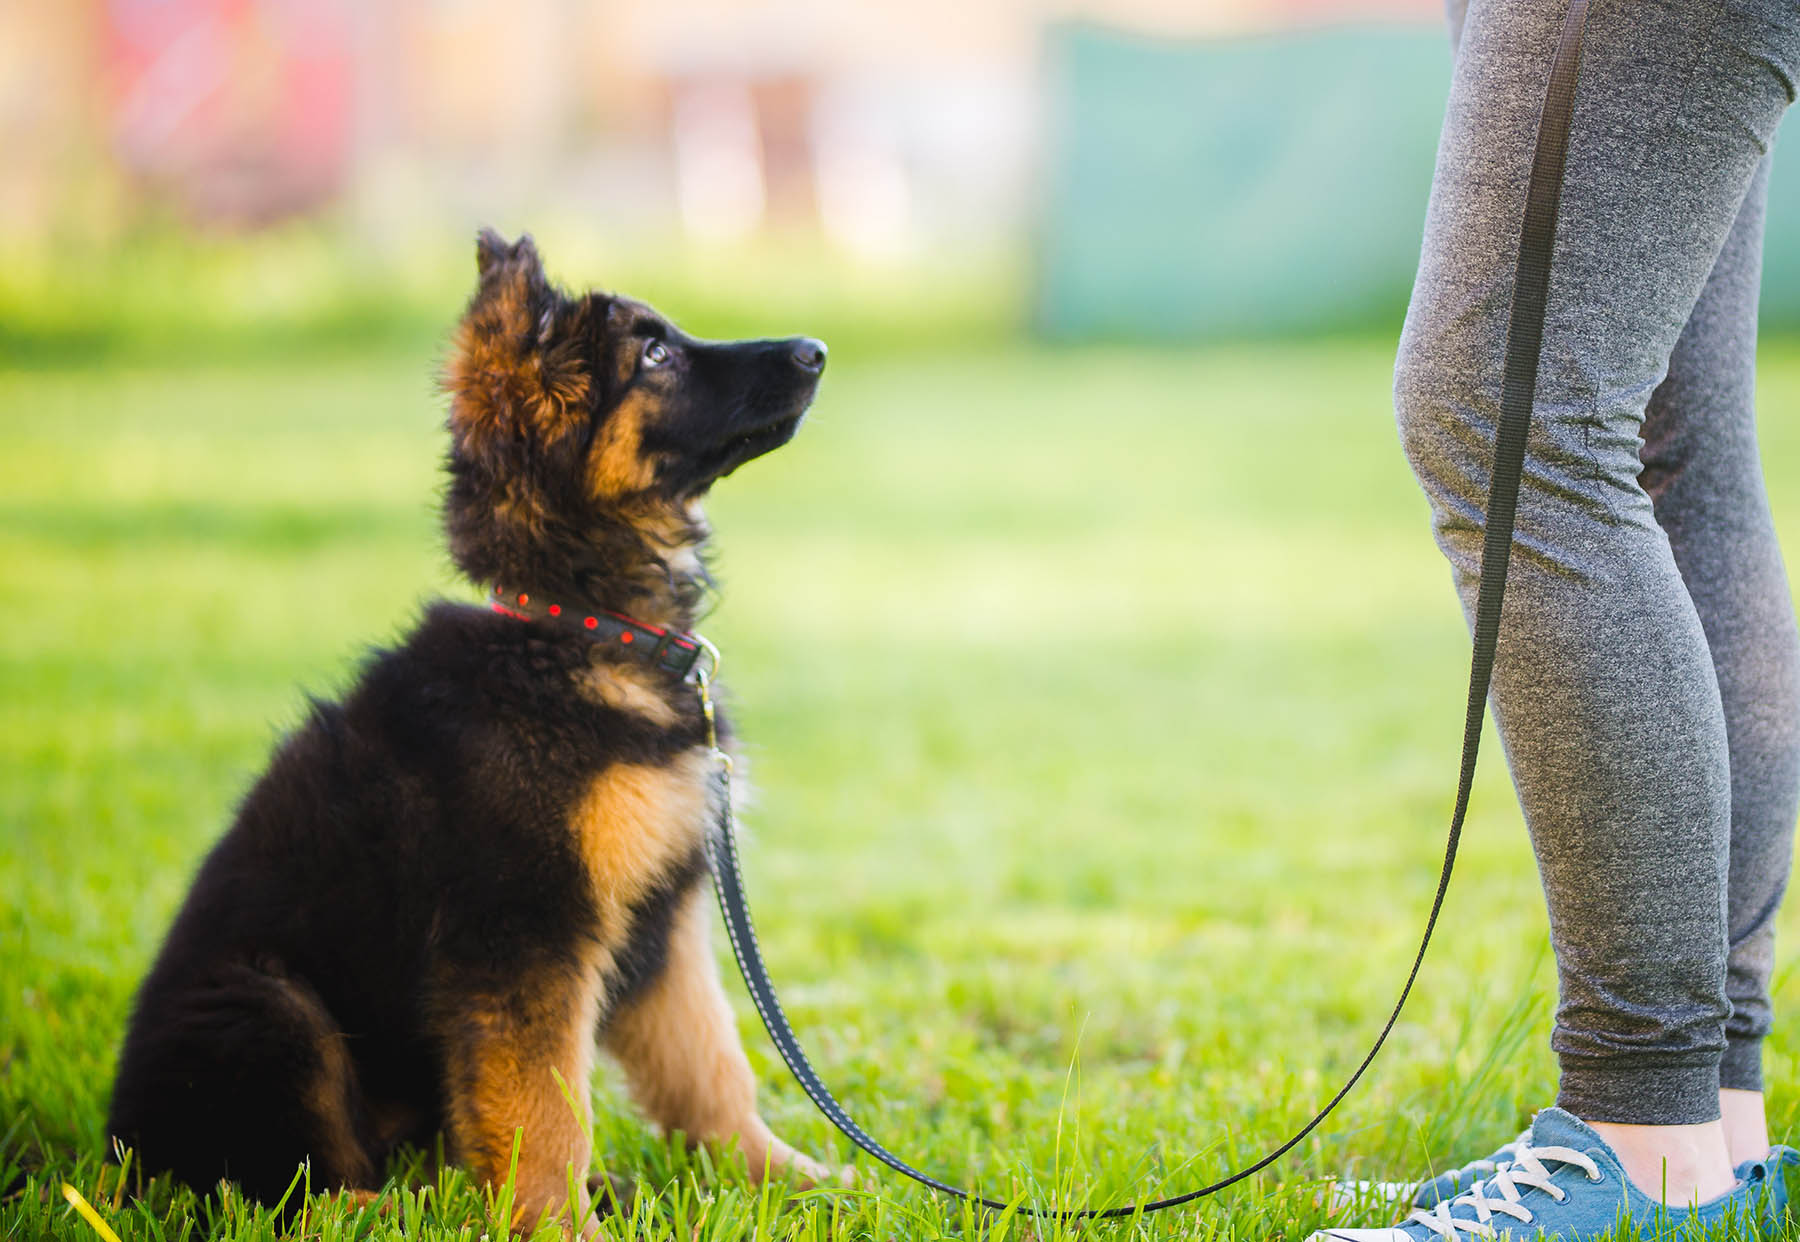 Puppy-Proofing Tips: Creating a Safe Environment for Your New Furry Friend